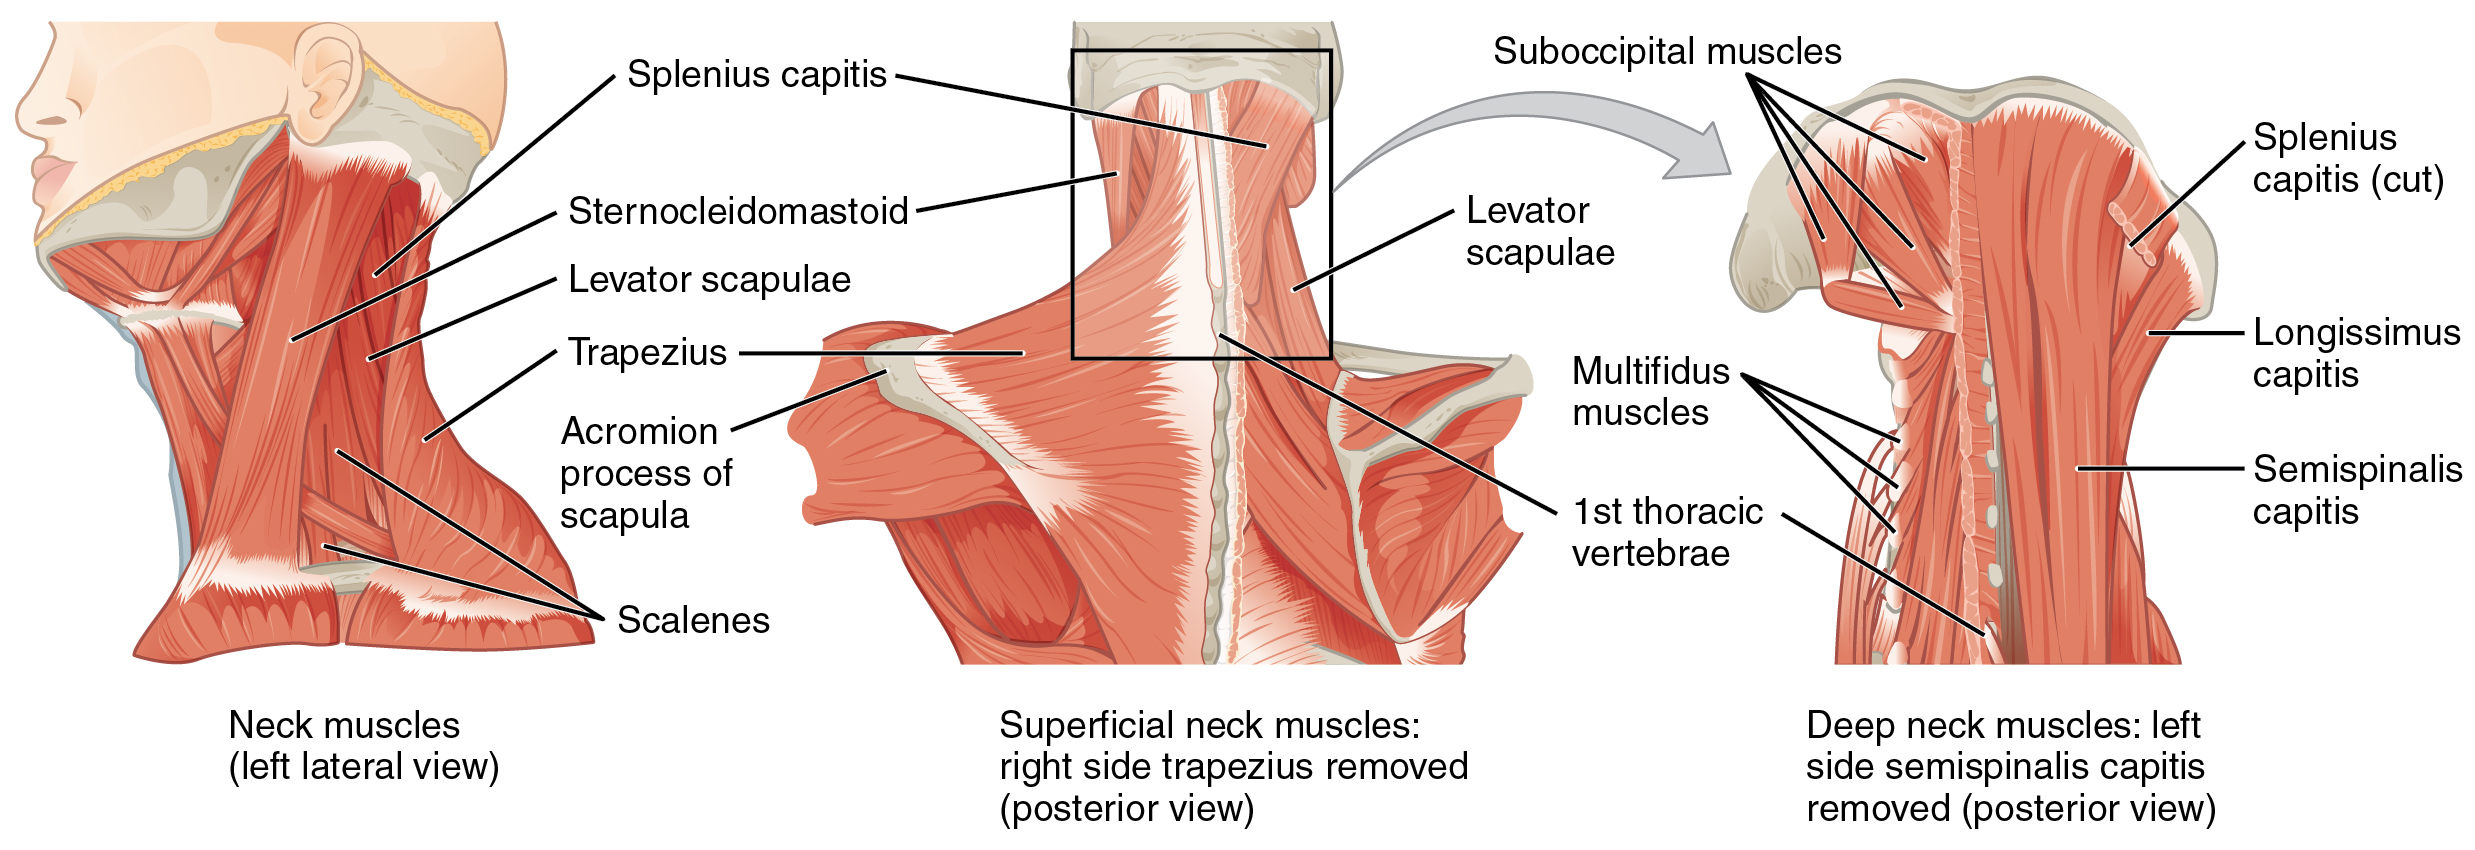 Axial Muscles of the Head, Neck, and Back – Anatomy and Physiology